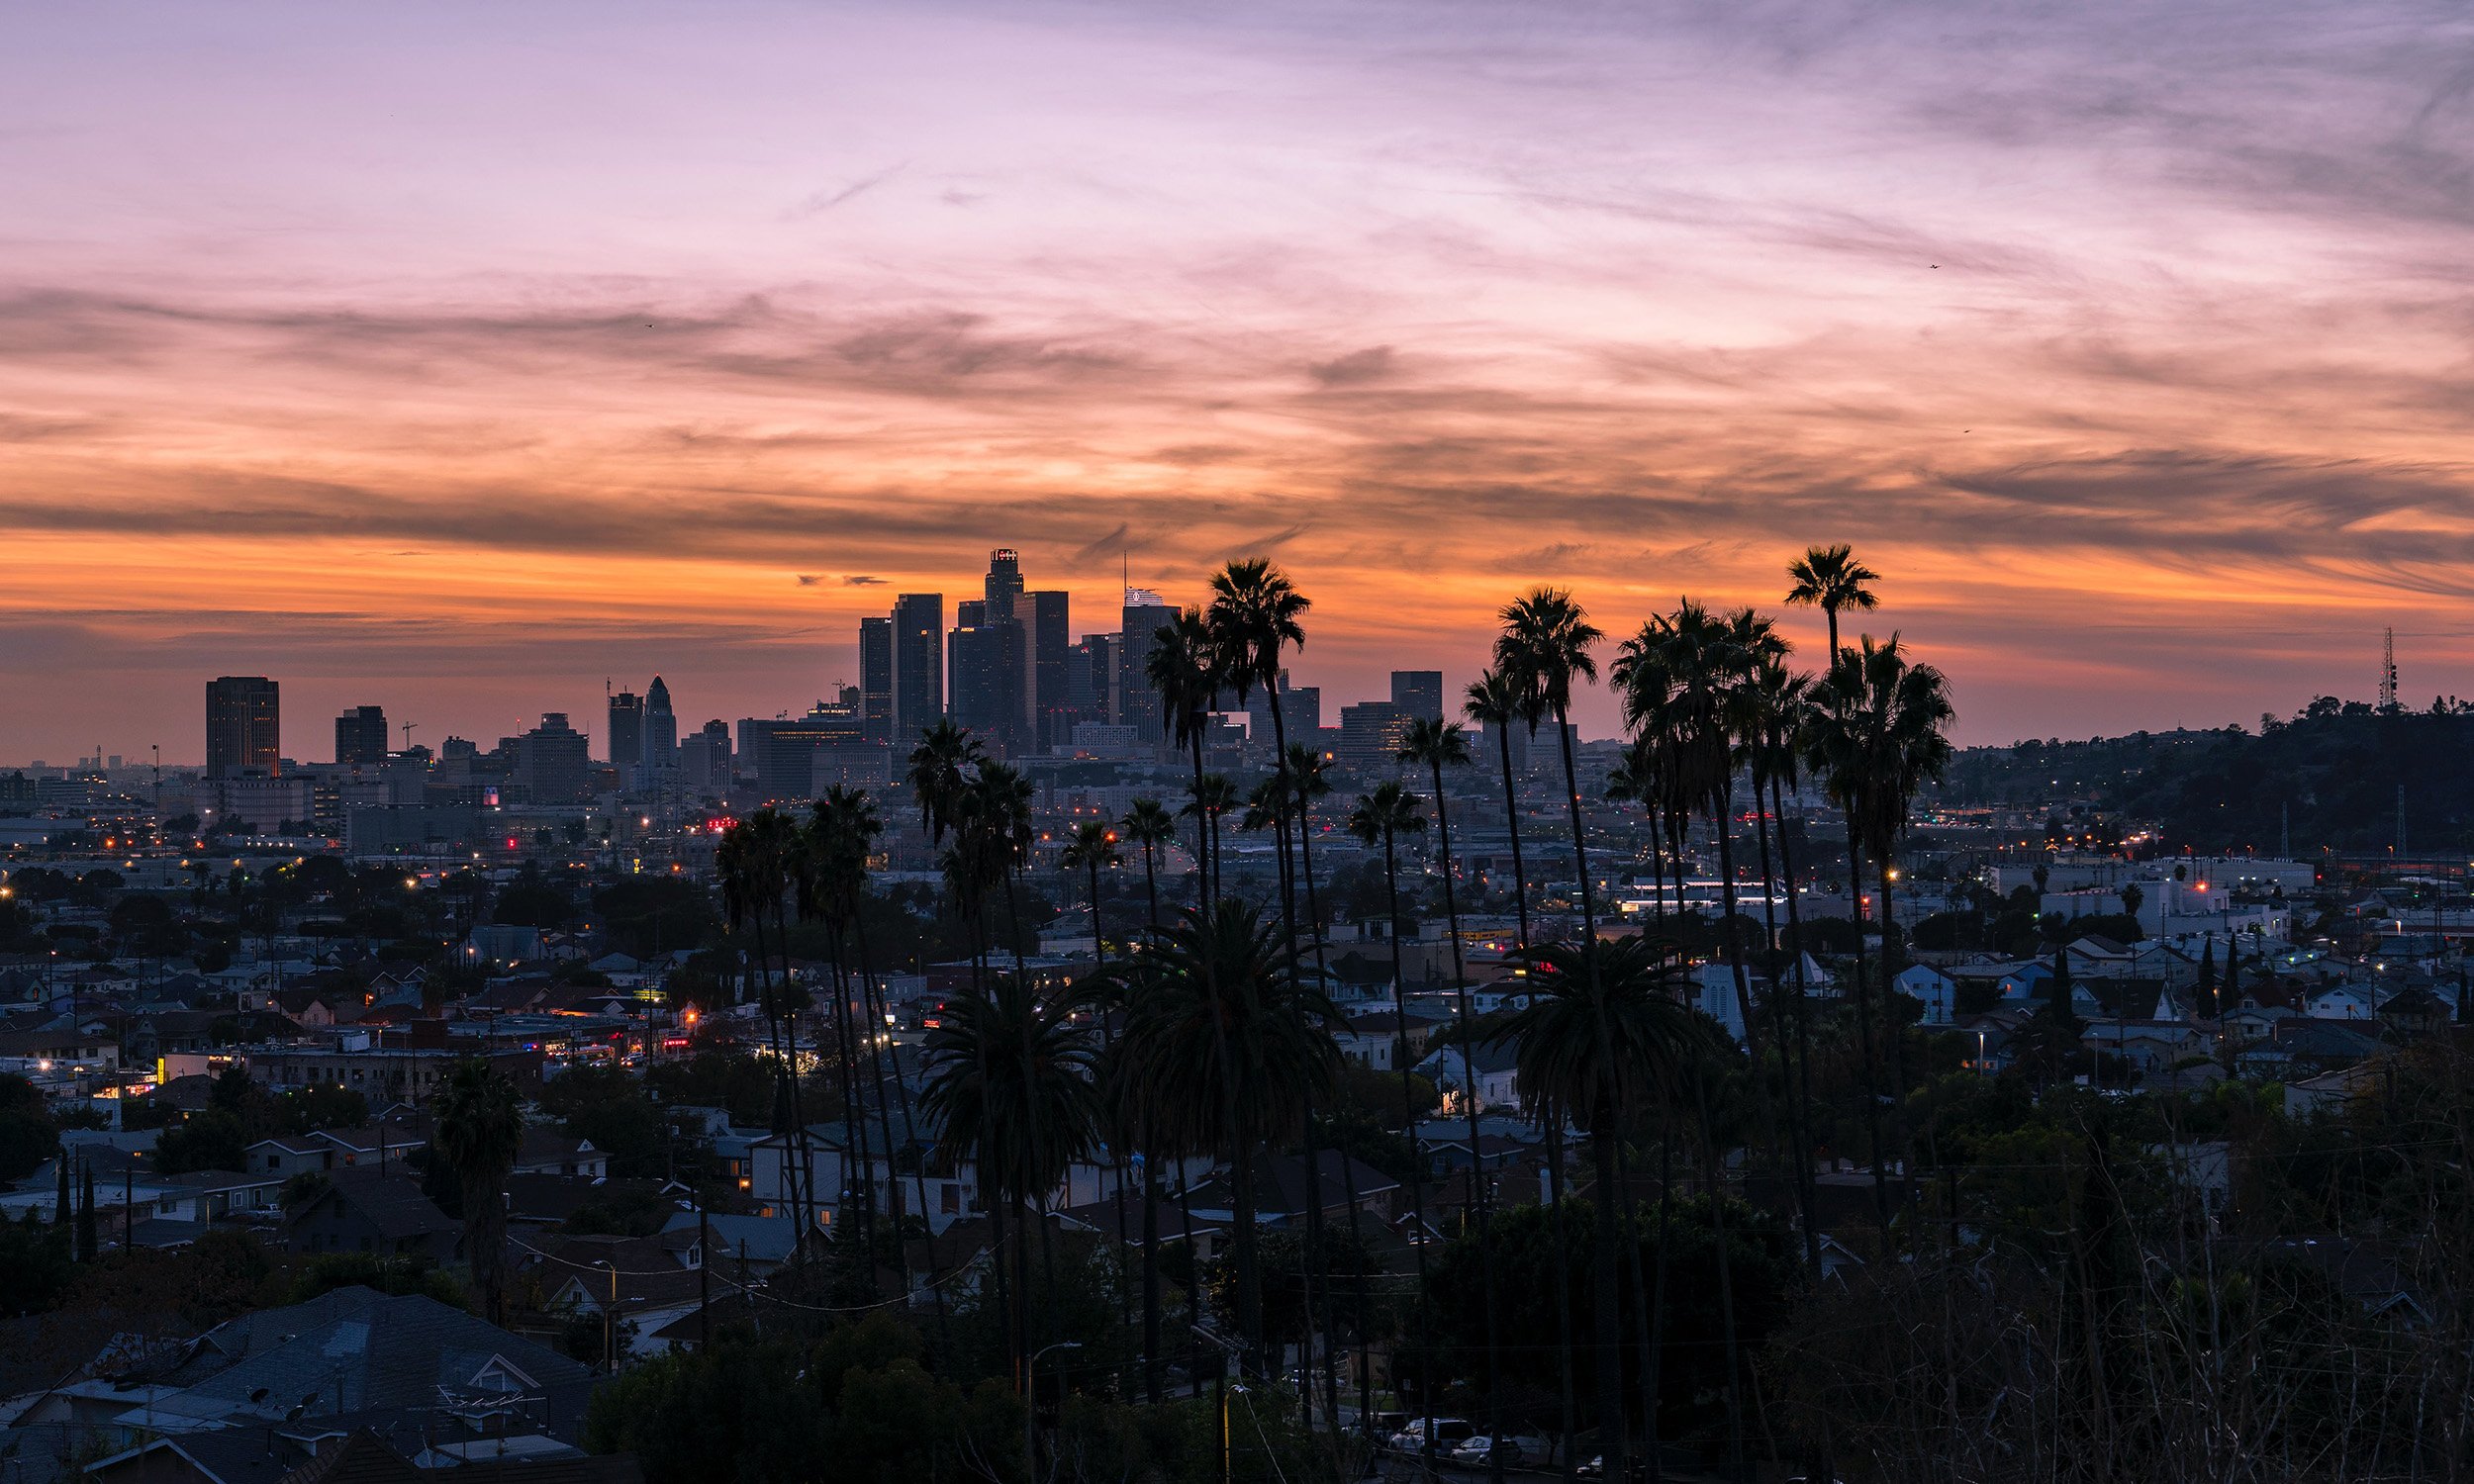 Los Angeles Virtual Guide: 27 Tours & Attractions You Can Visit from Home